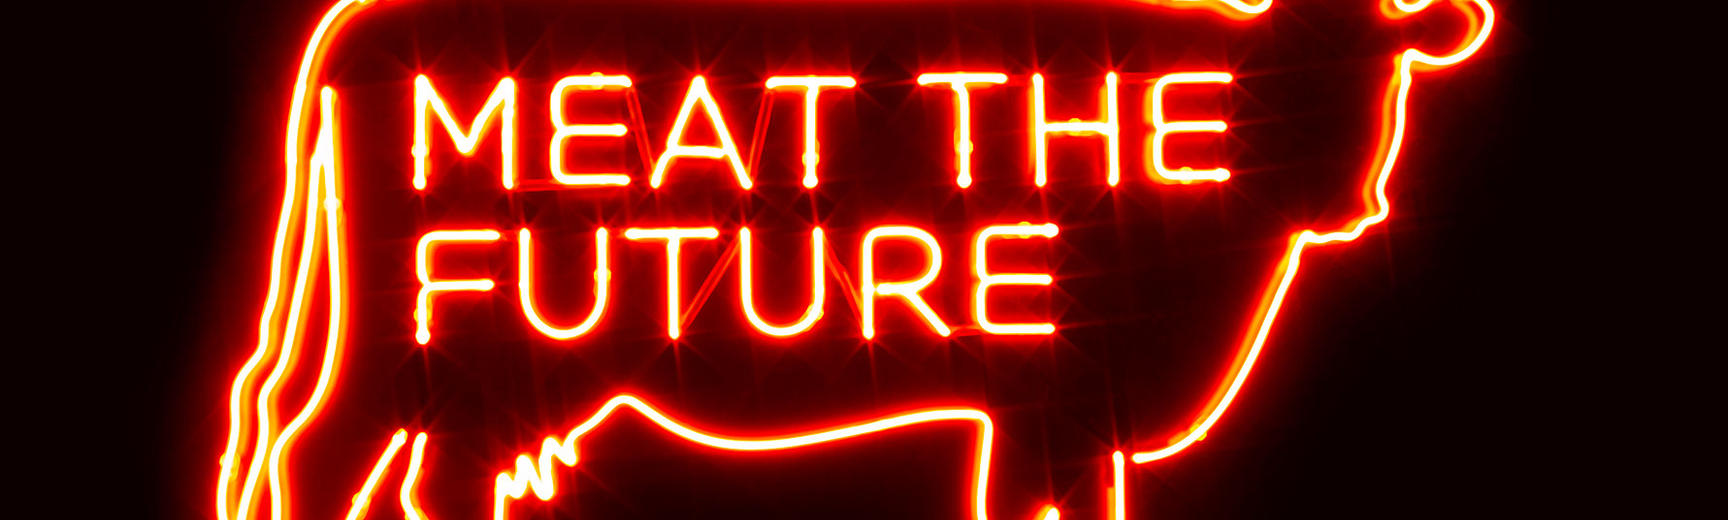 Neon sign of cow with Meat the Future